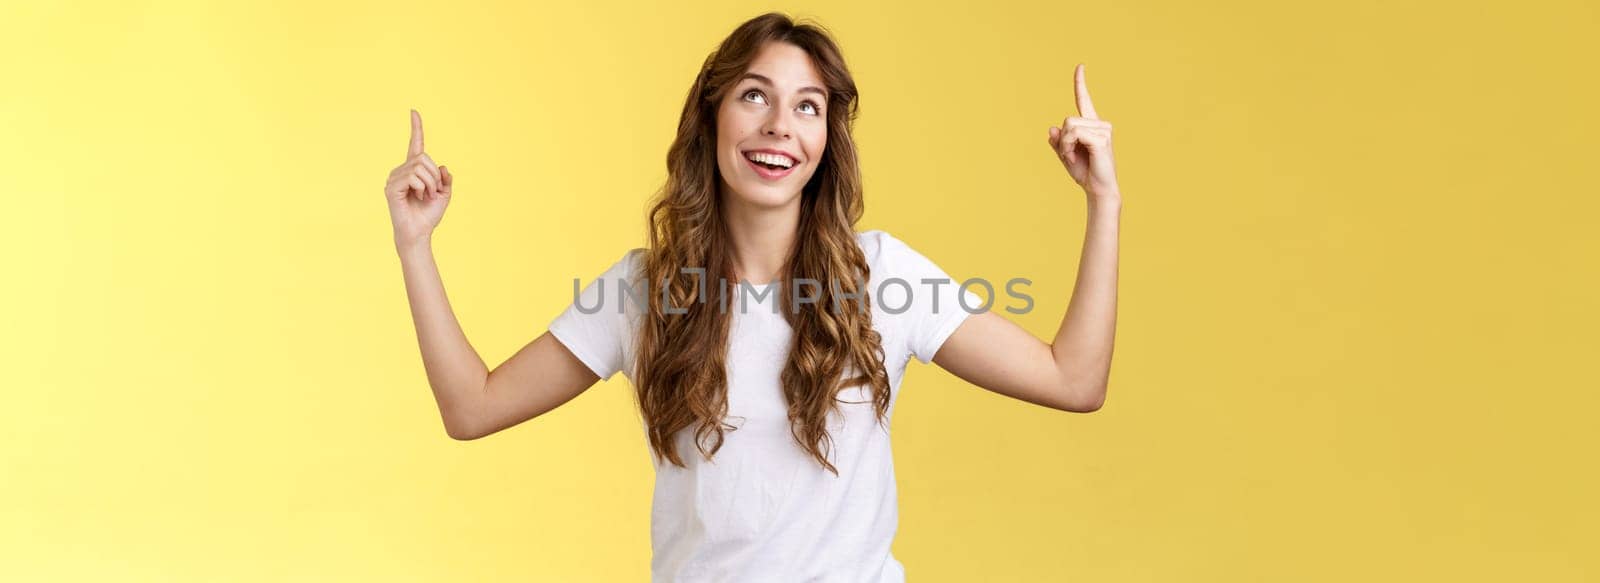 Happy admiring cute european curly-haired girl long haircut look pointing up impressed amused smiling broadly satisfactory delighted stand white t-shirt yellow background joyfully react good promo. Lifestyle.